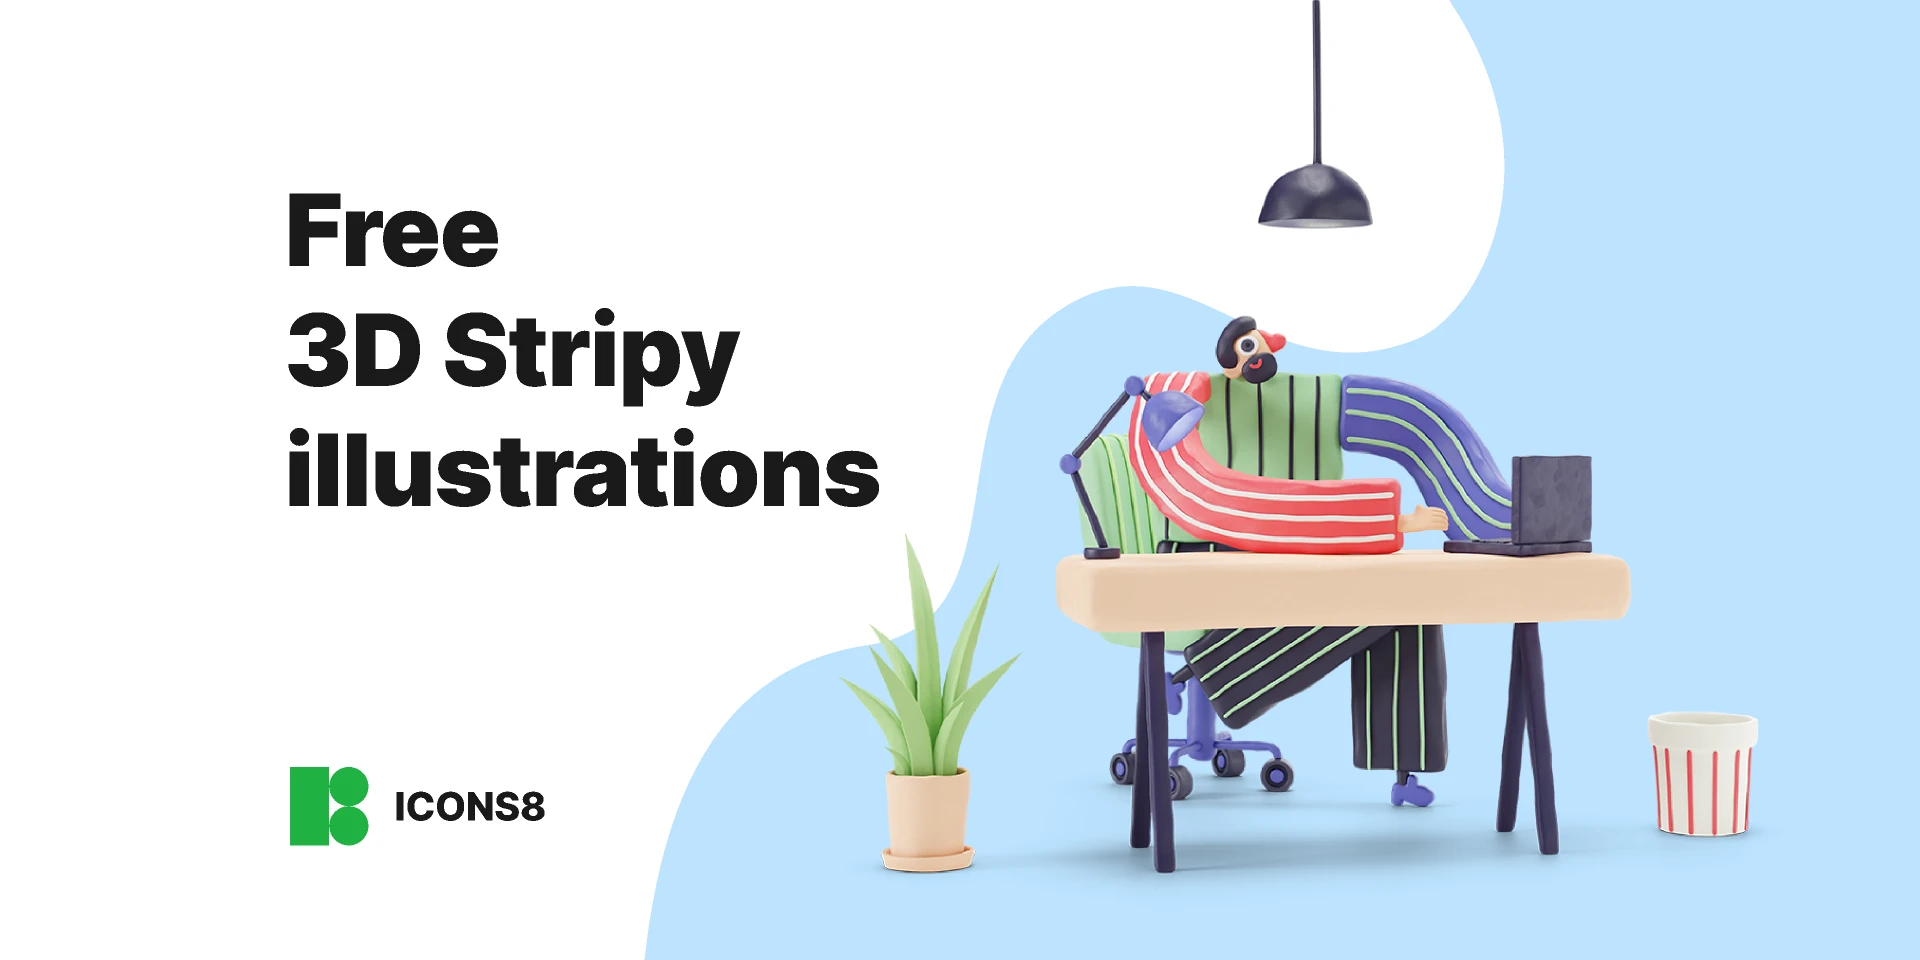 Free 3D Stripy illustrations for Figma and Adobe XD